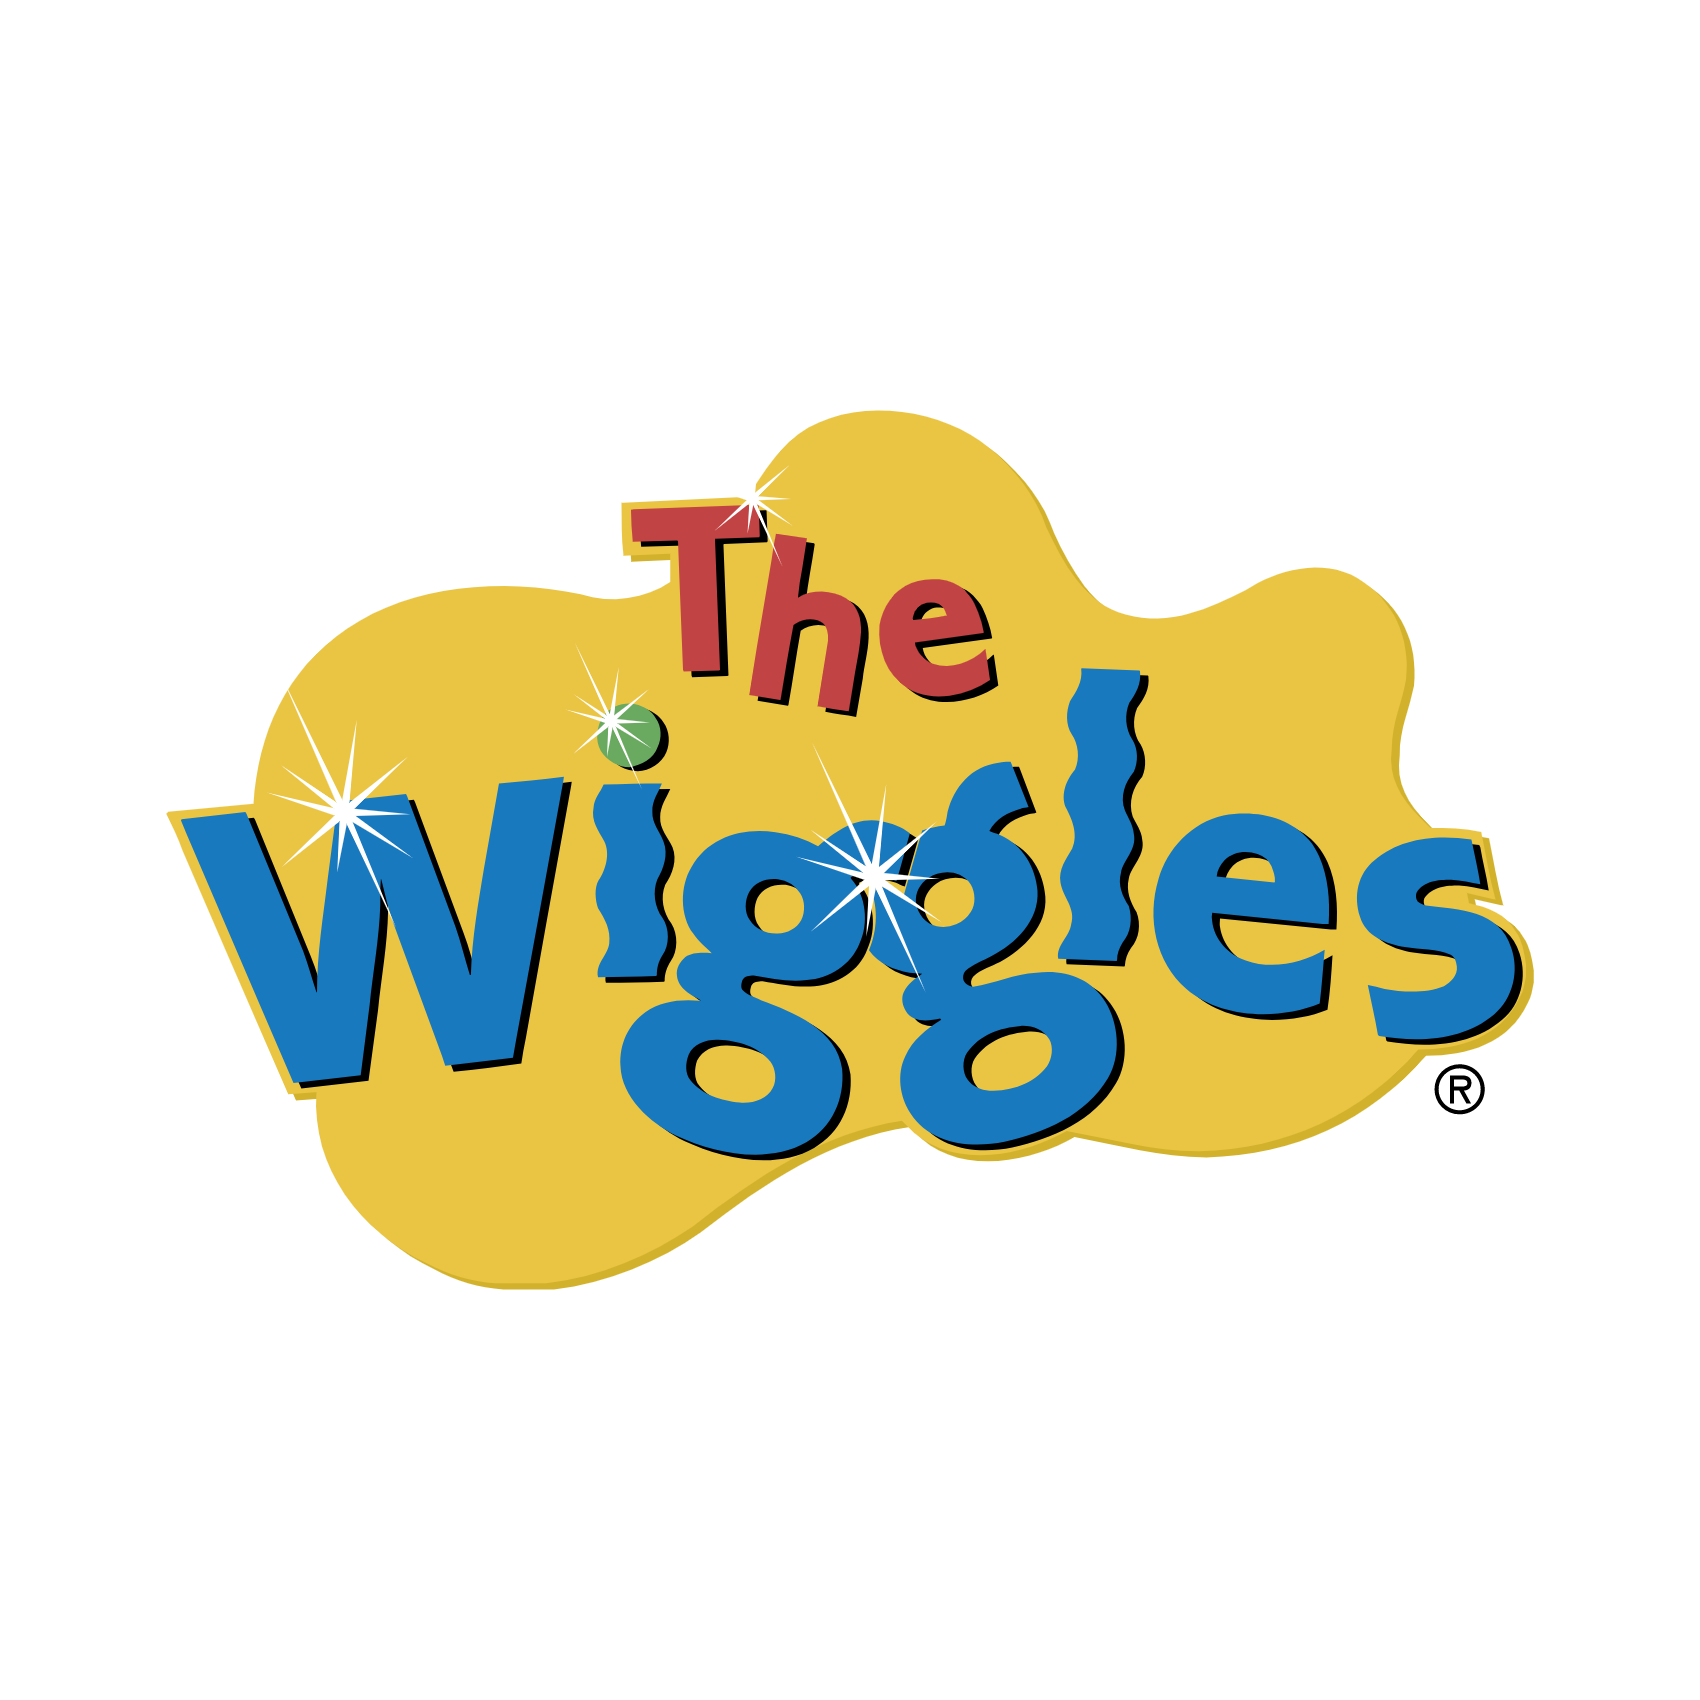 Download The Wiggles Logo PNG and Vector (PDF, SVG, Ai, EPS) Free